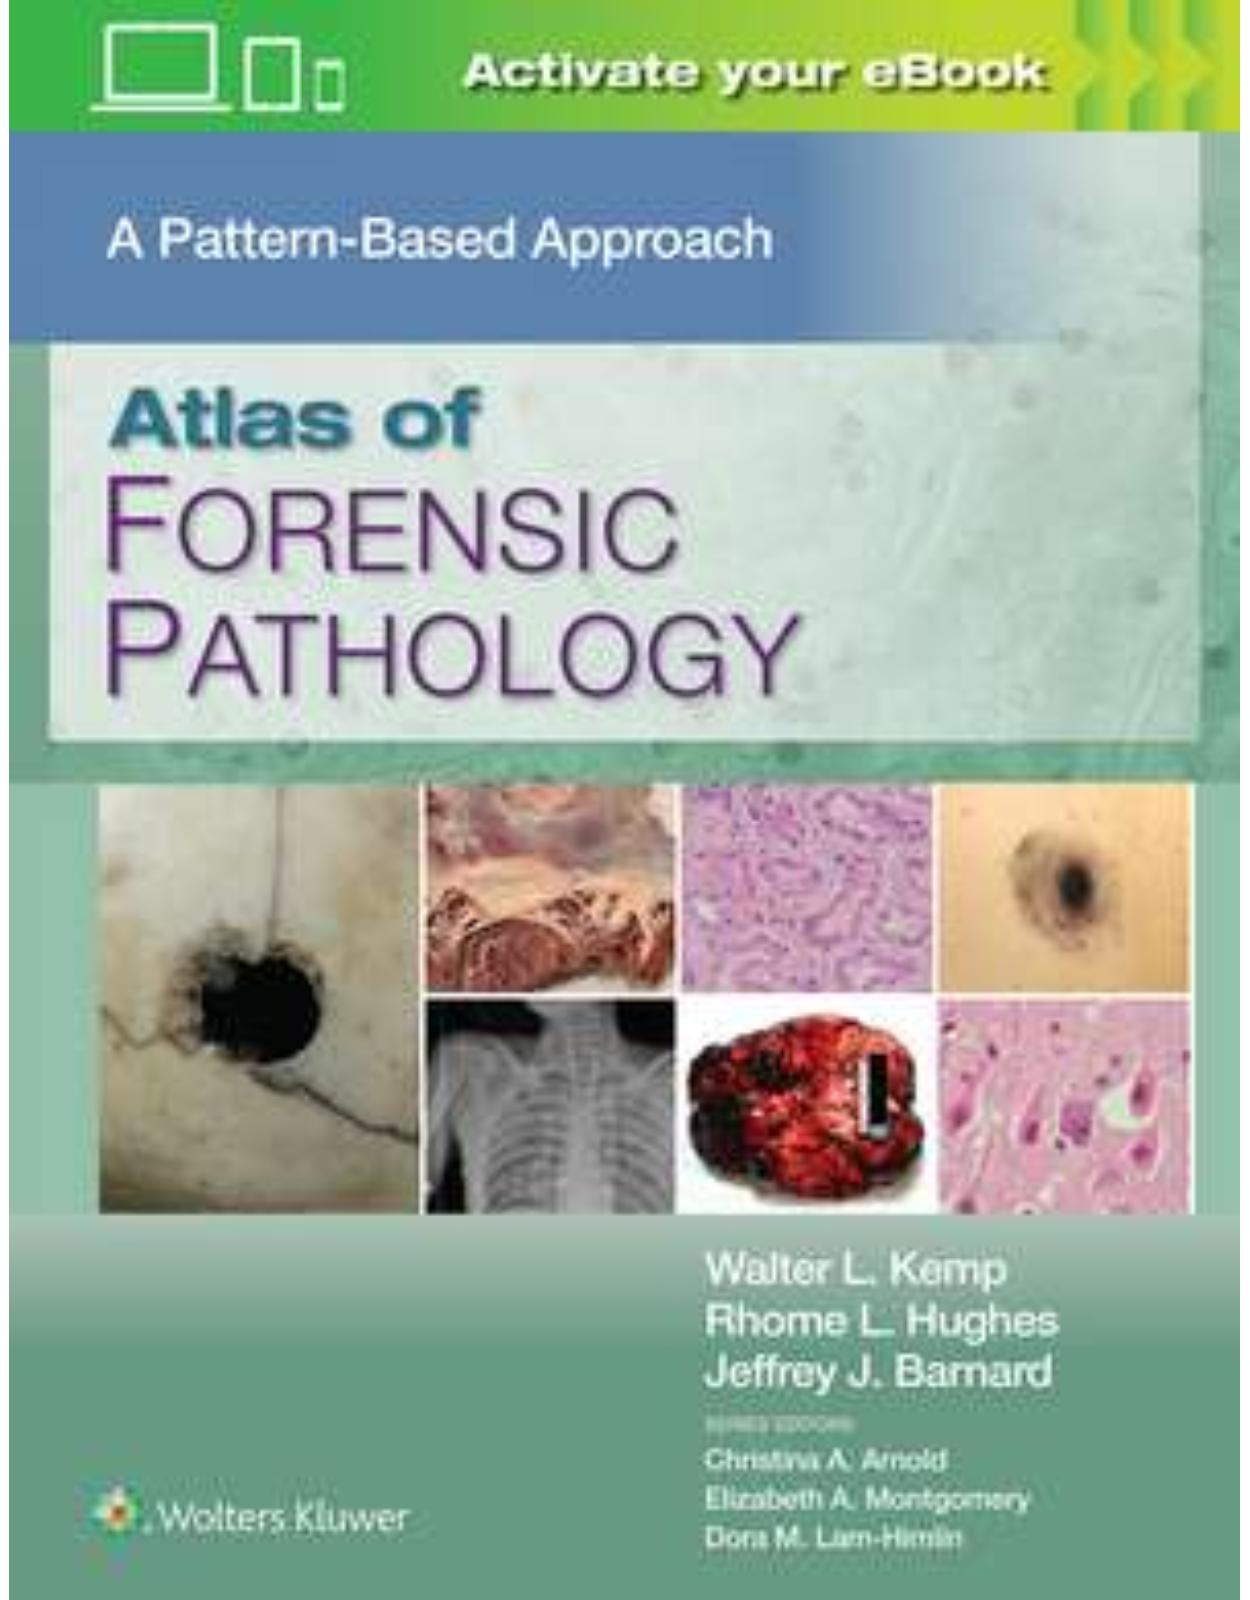 Atlas of Forensic Pathology: A Pattern Based Approach